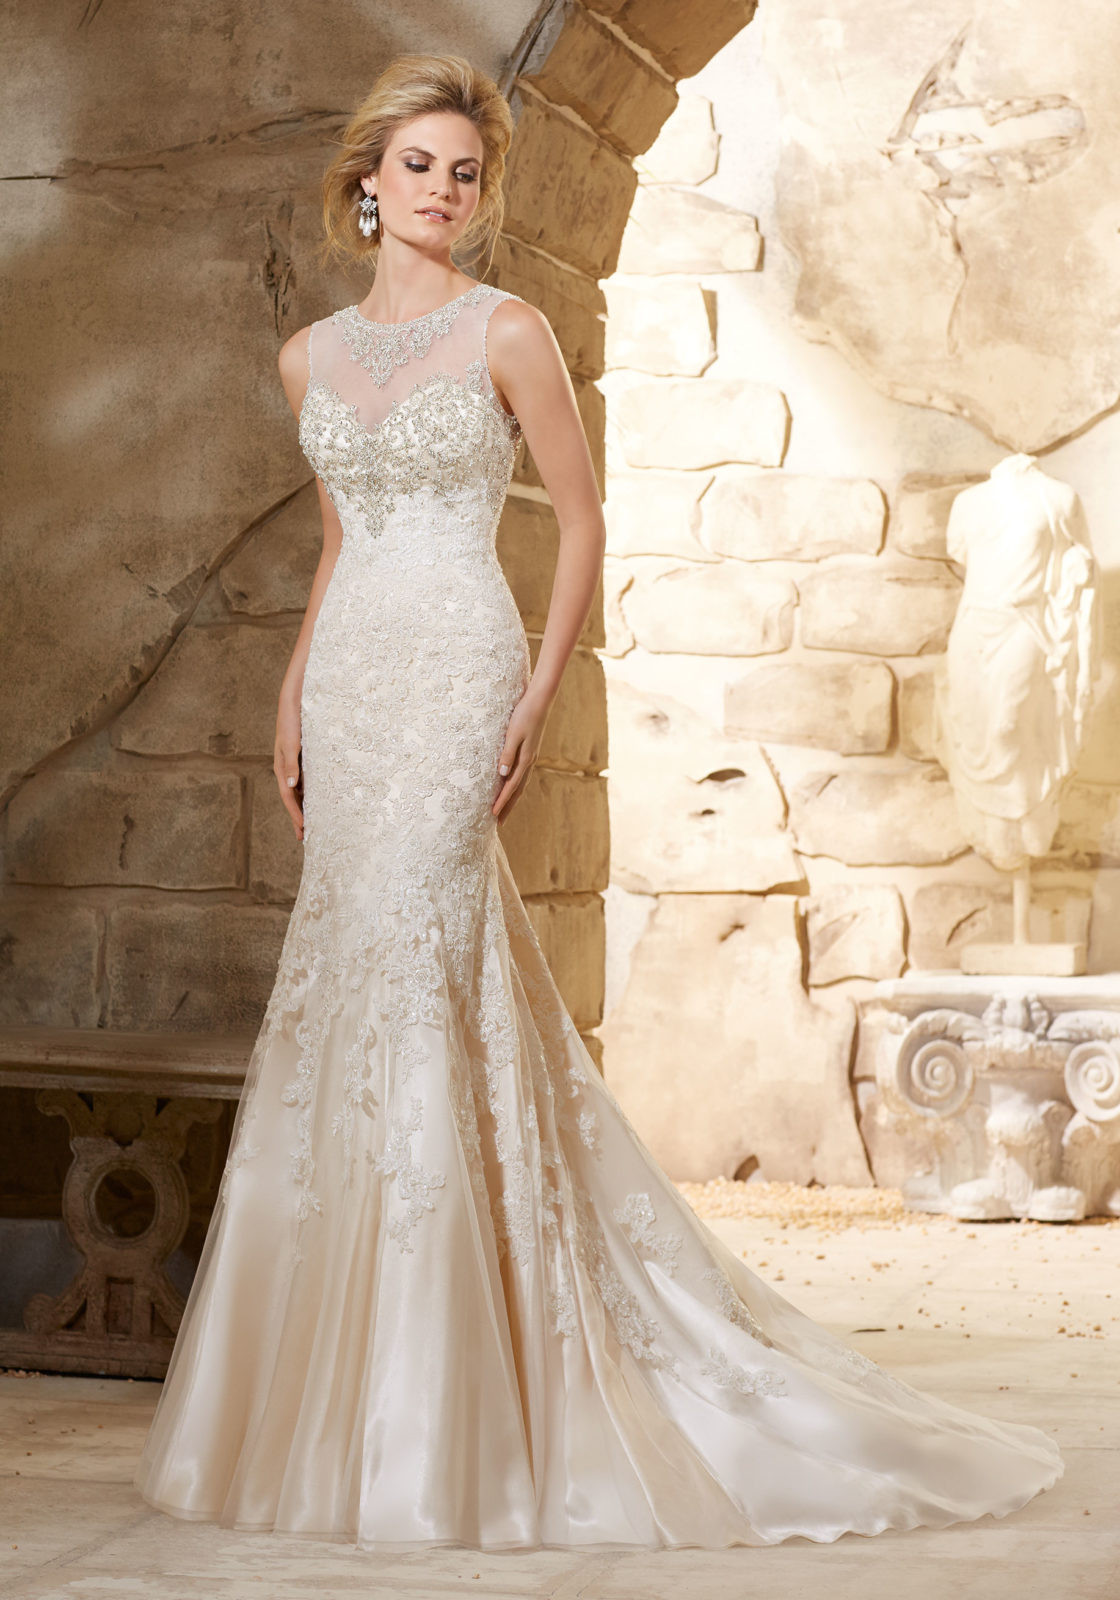 Beaded Wedding Dresses
 Beaded Bodice on Lace over Soft Satin Bridal Gown